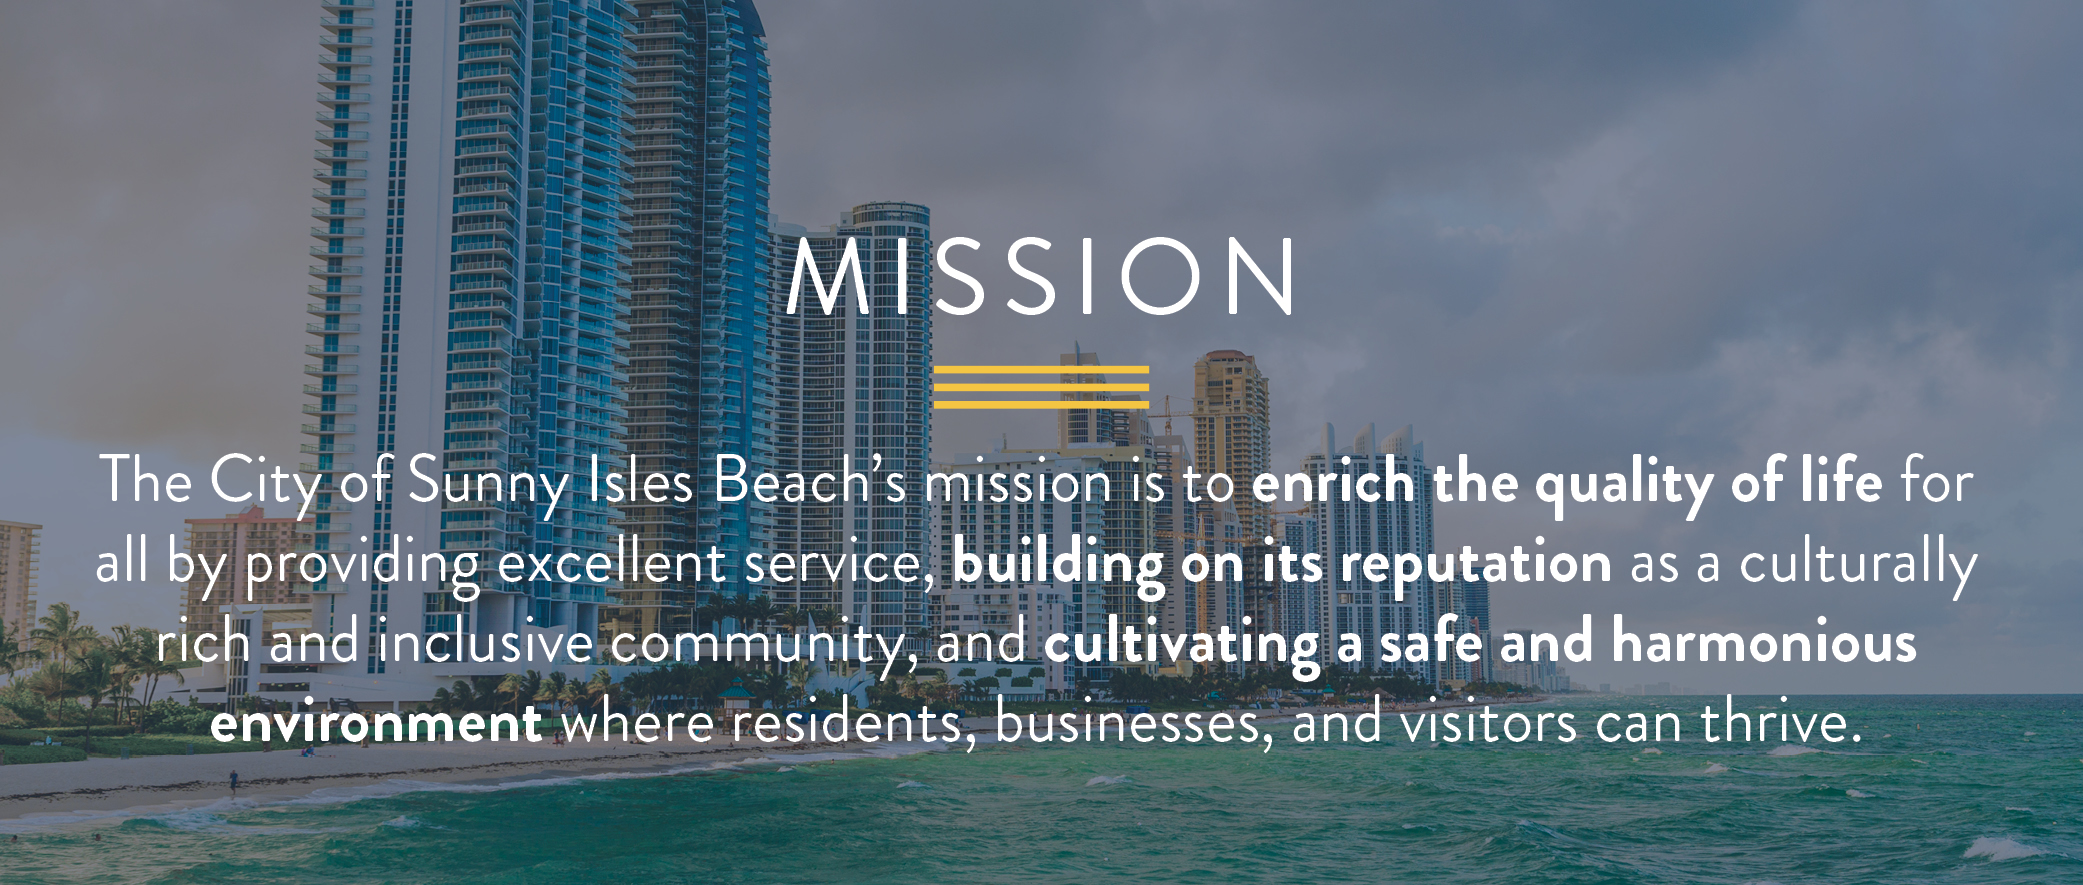 The City of Sunny Isles Beach’s mission is to enrich the quality of life for all by providing excellent service, building on its reputation as a culturally rich and inclusive community, and cultivating a safe and harmonious environment where residents, businesses, and visitors can thrive.